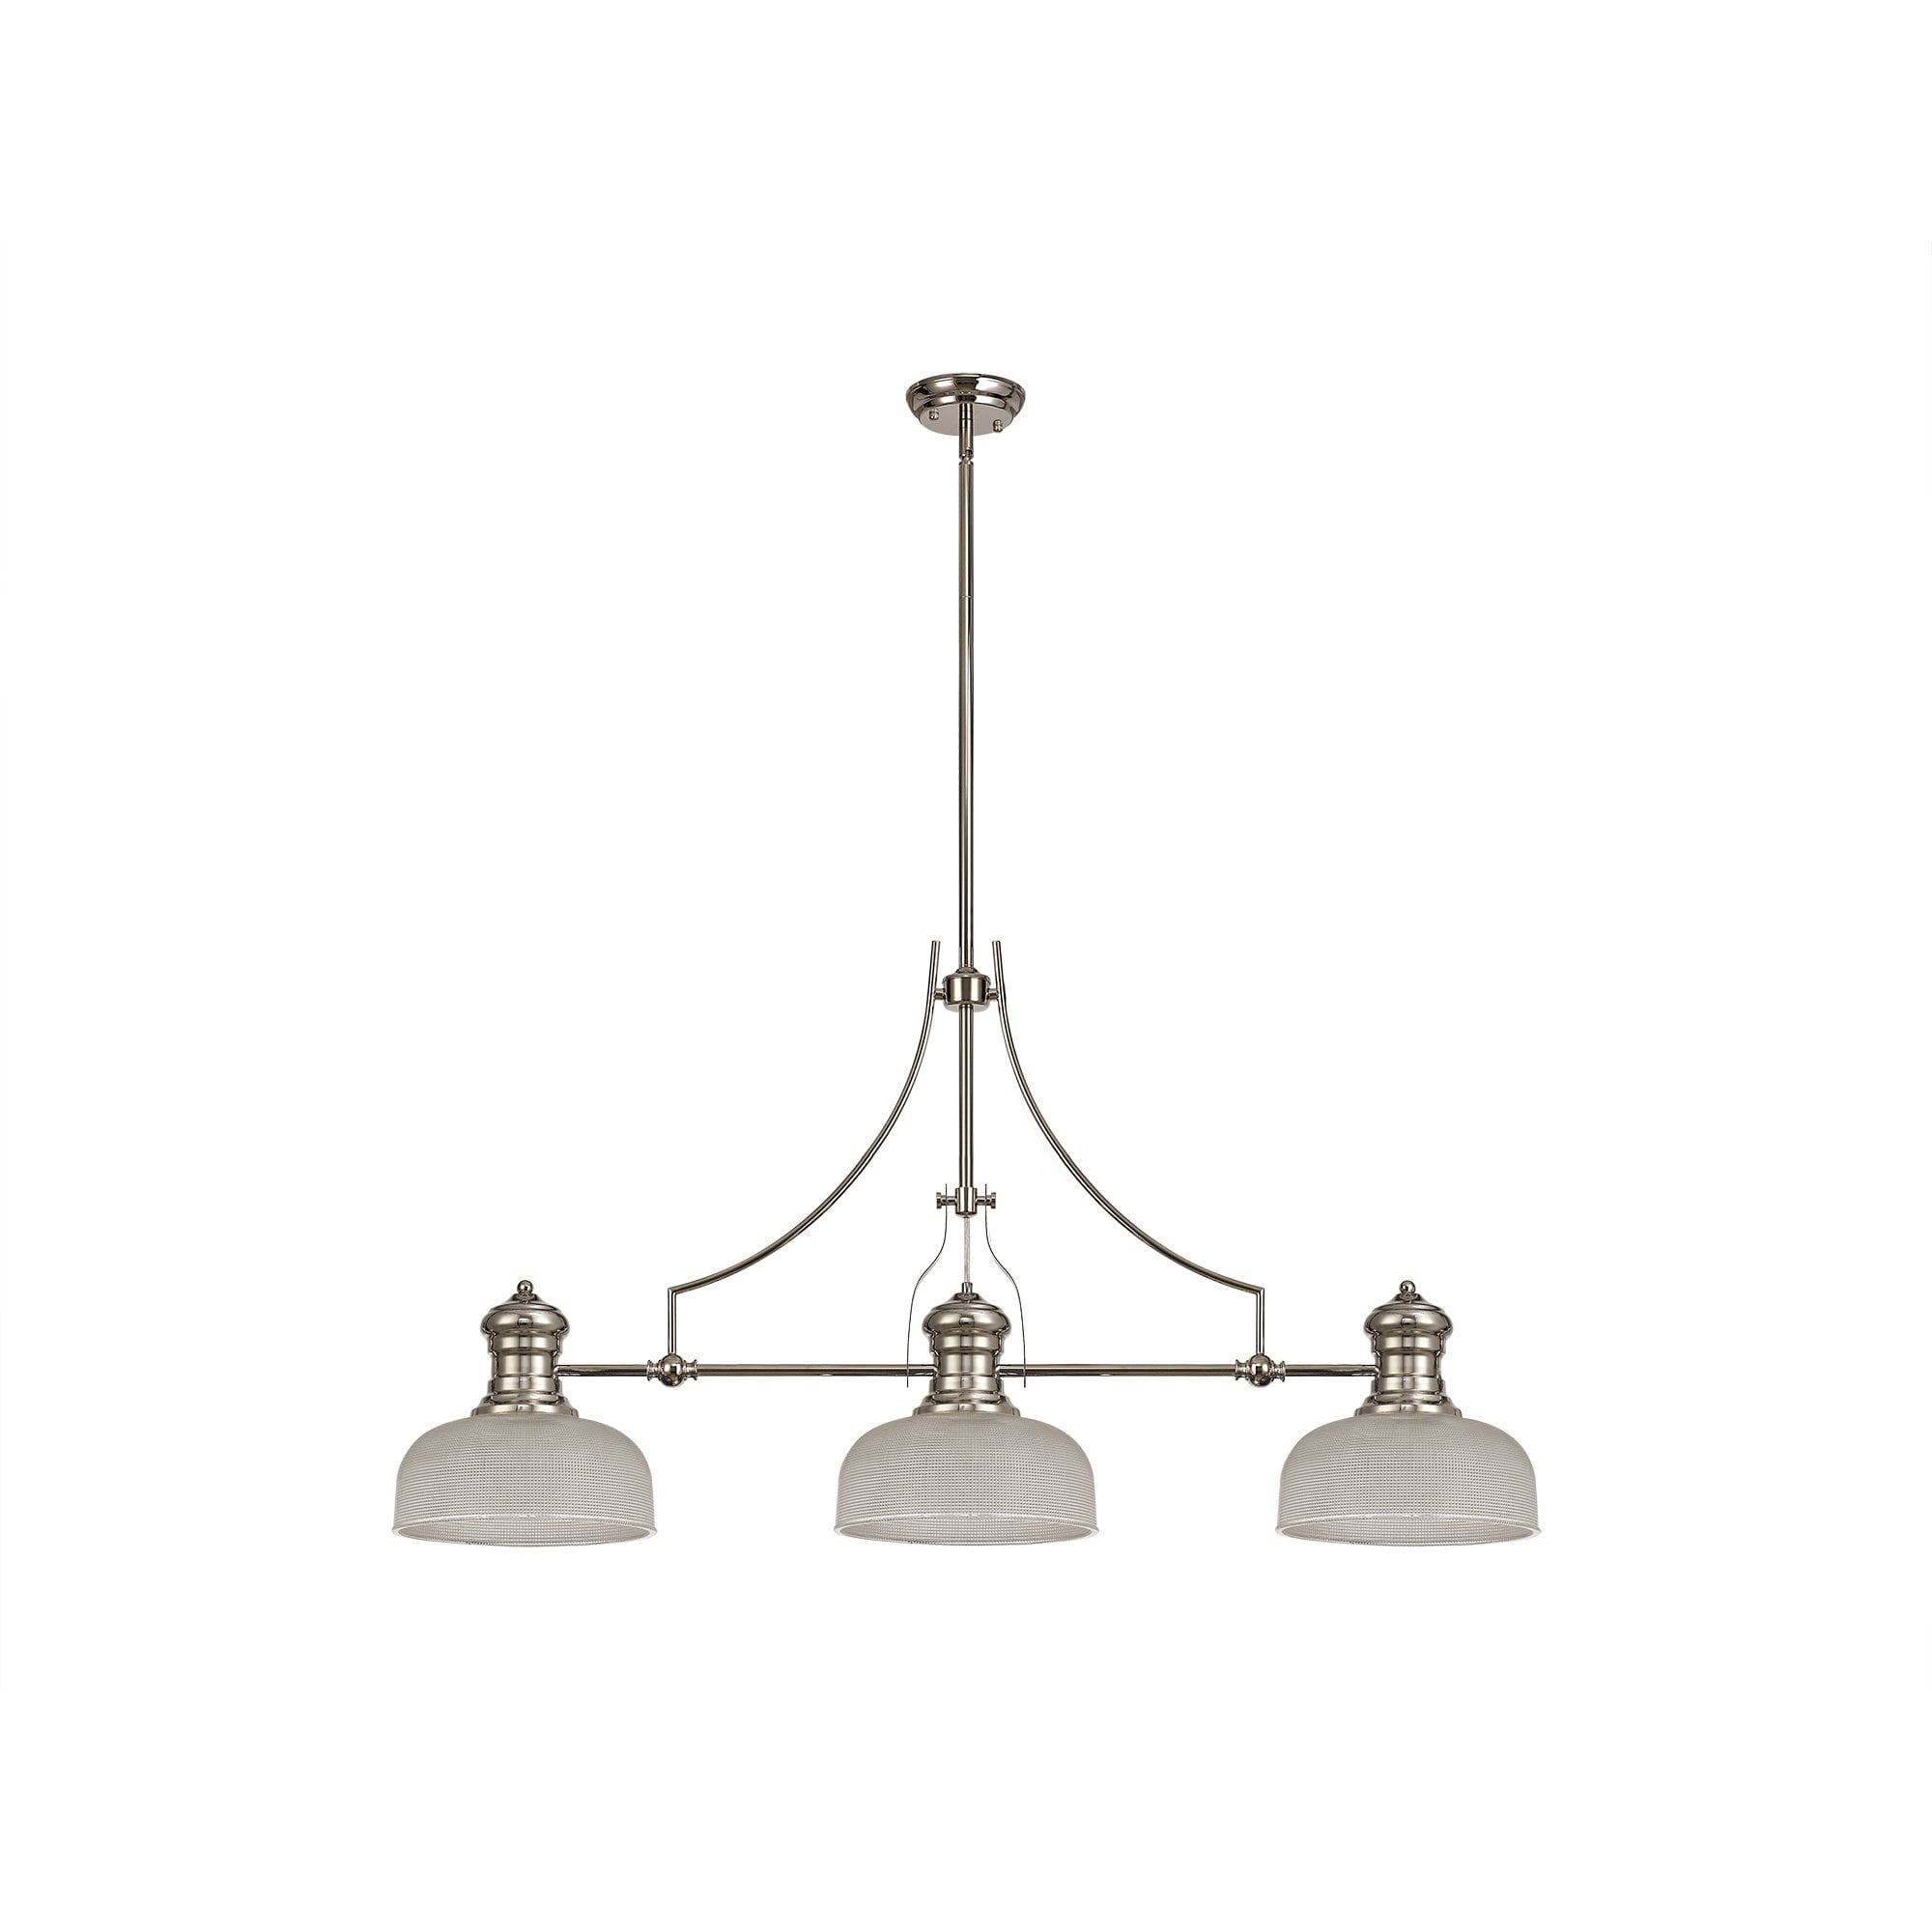 3 Light Telescopic Pendant E27 With 26.5cm Prismatic Glass Shade, Polished Nickel/Clear